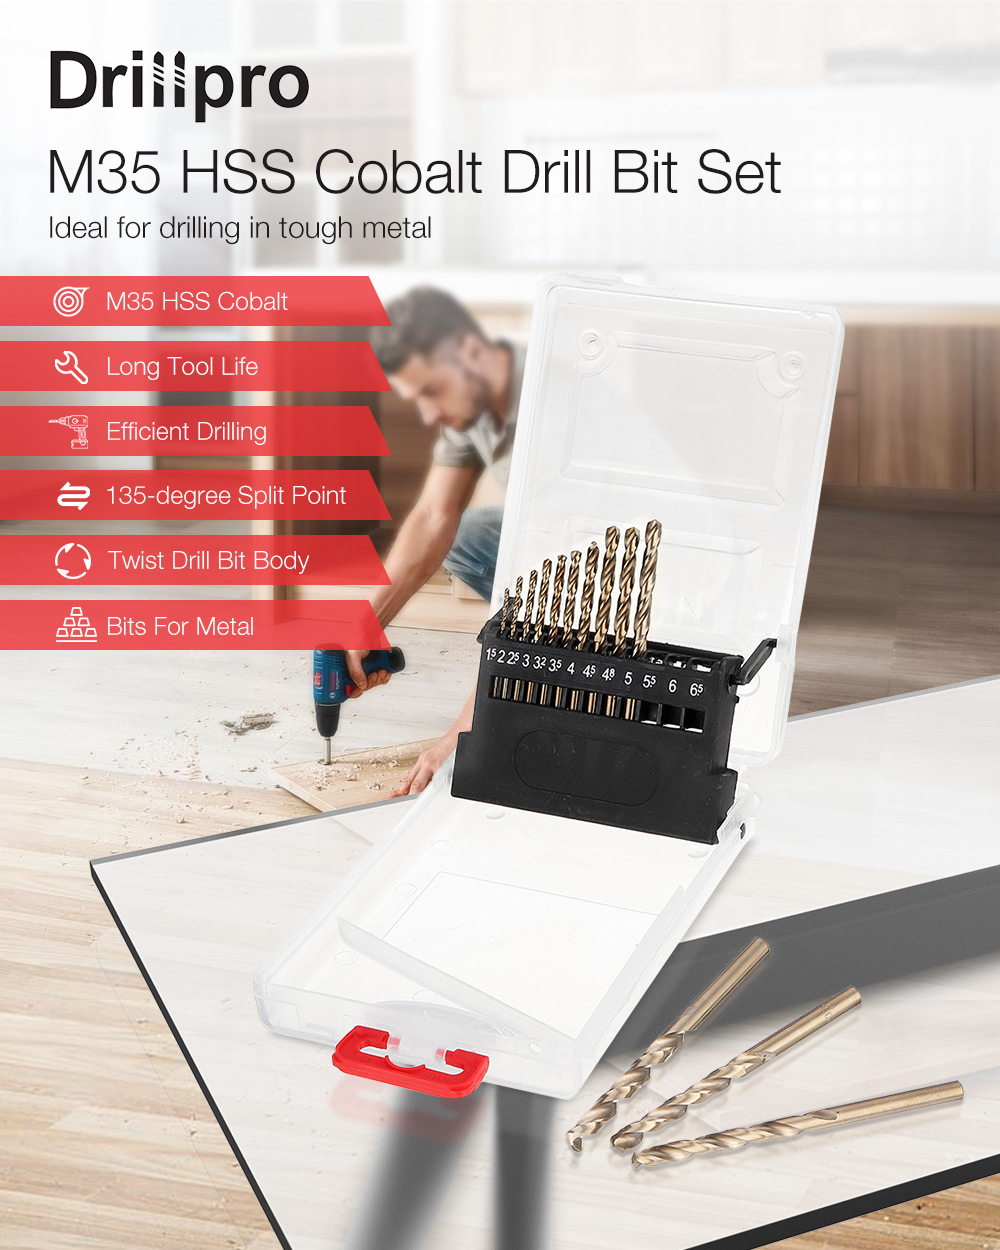 Drillpro-M35-Cobalt-Drill-Bit-Set-HSS-Co-Jobber-Length-Twist-Drill-Bits-with-Plastic-Case-for-Stainl-1777504-1